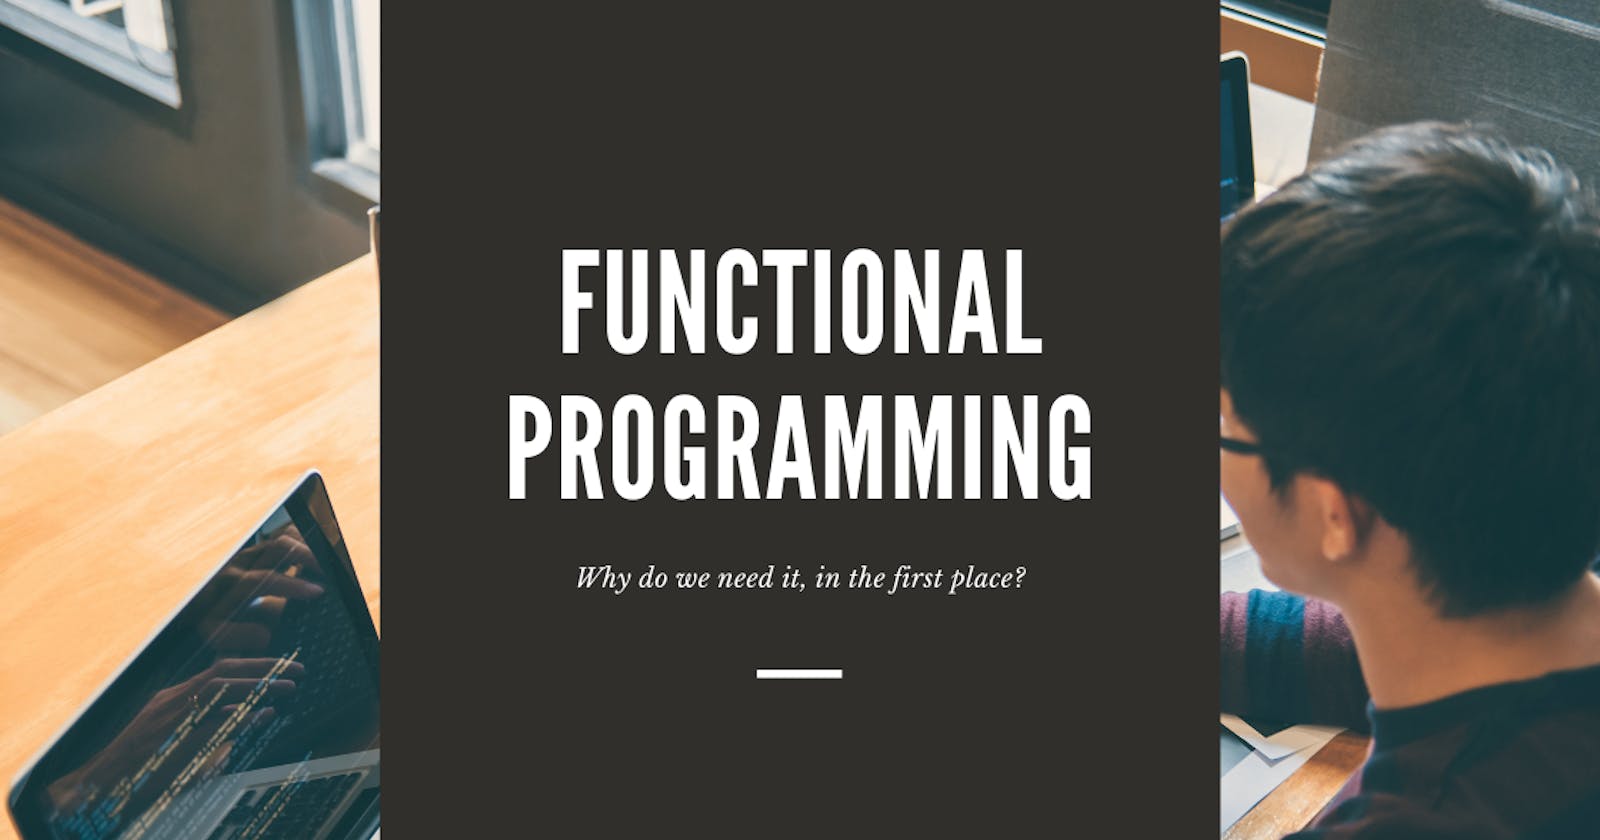 Why so much love for functional programming?